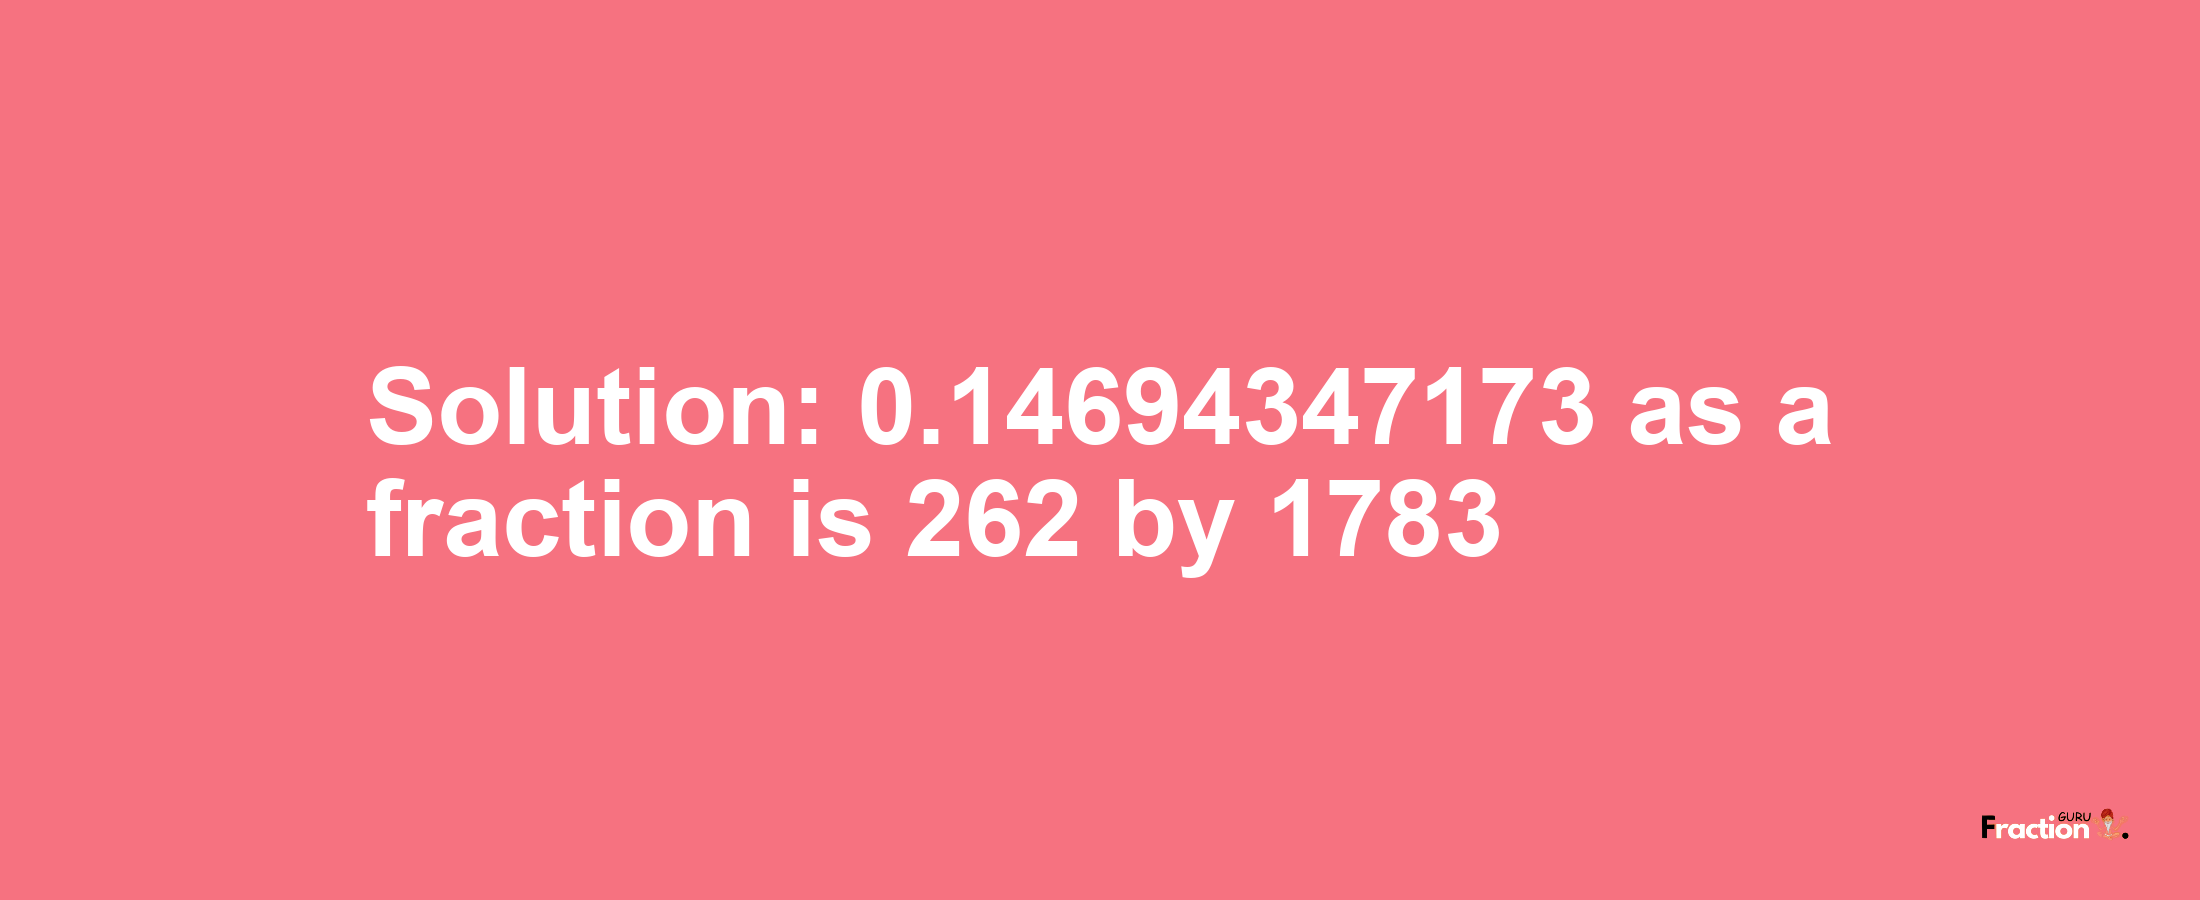 Solution:0.14694347173 as a fraction is 262/1783